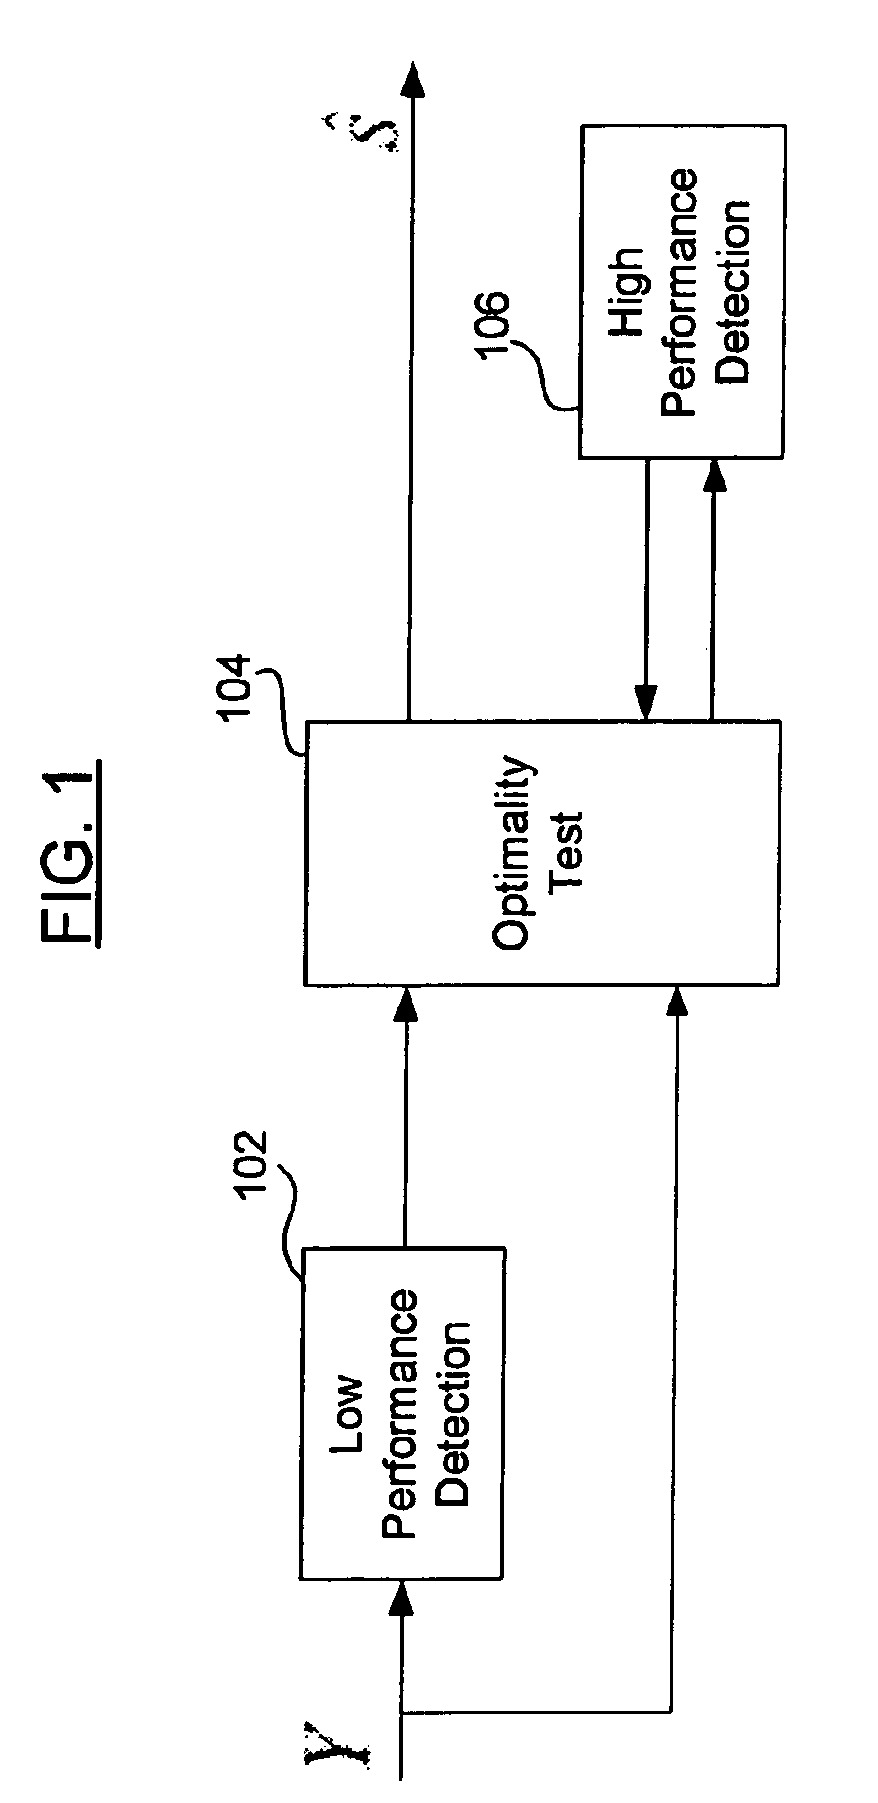 Systems and methods for multistage signal detection in mimo transmissions and iterative detection of precoded OFDM